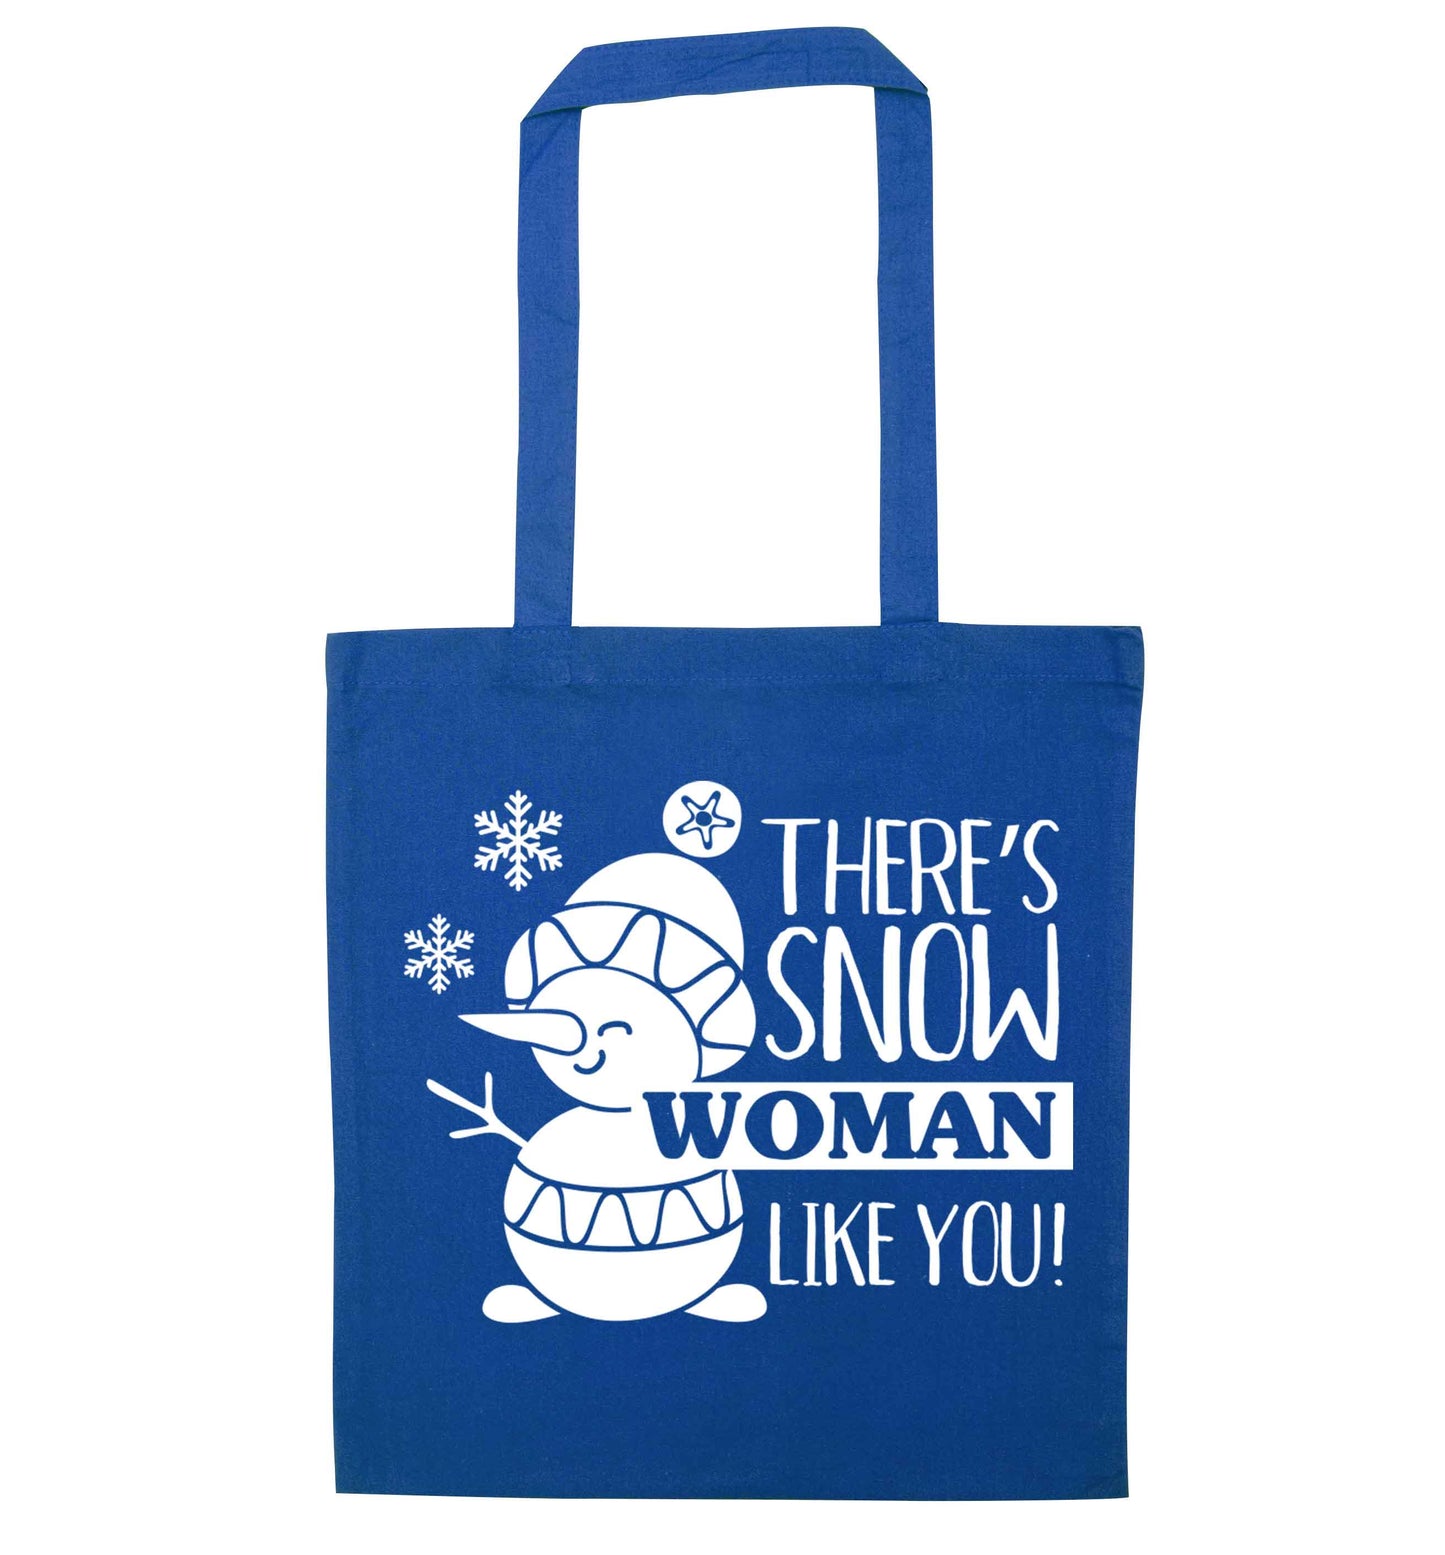 There's snow woman like you blue tote bag